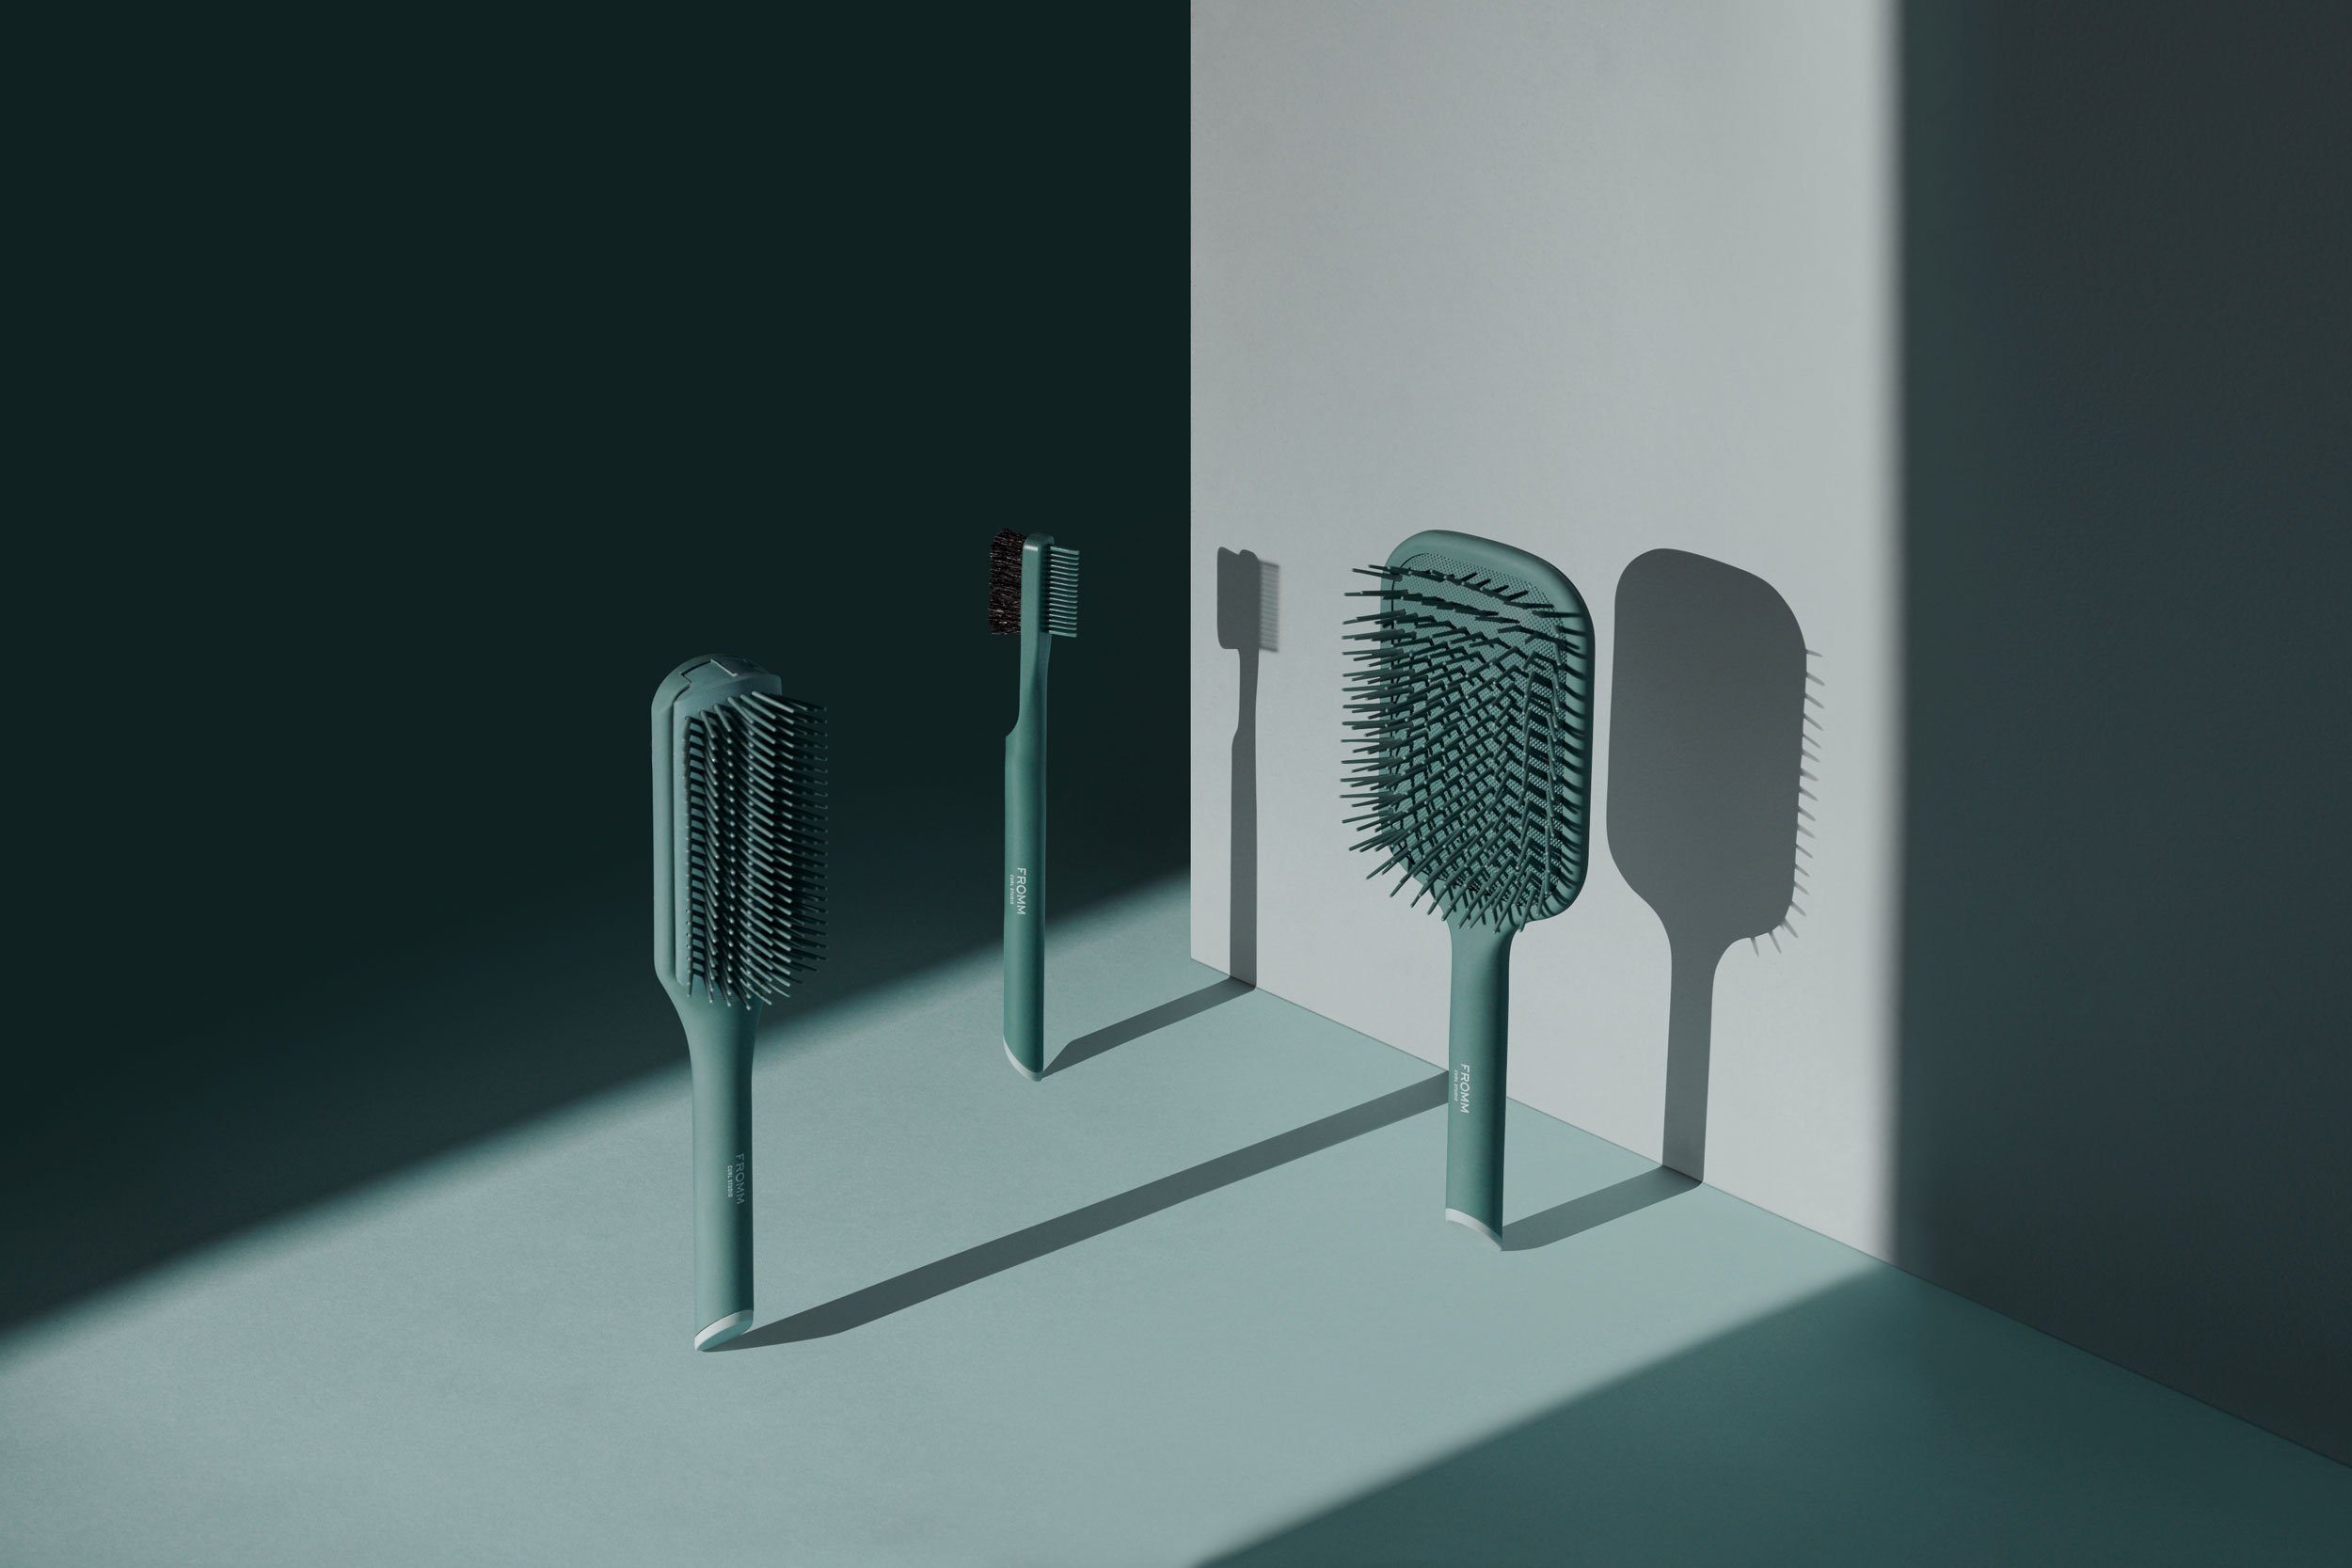 Pair of green brushes with edge shaper brush/comb suspended vertically and lit to cast a long shadow